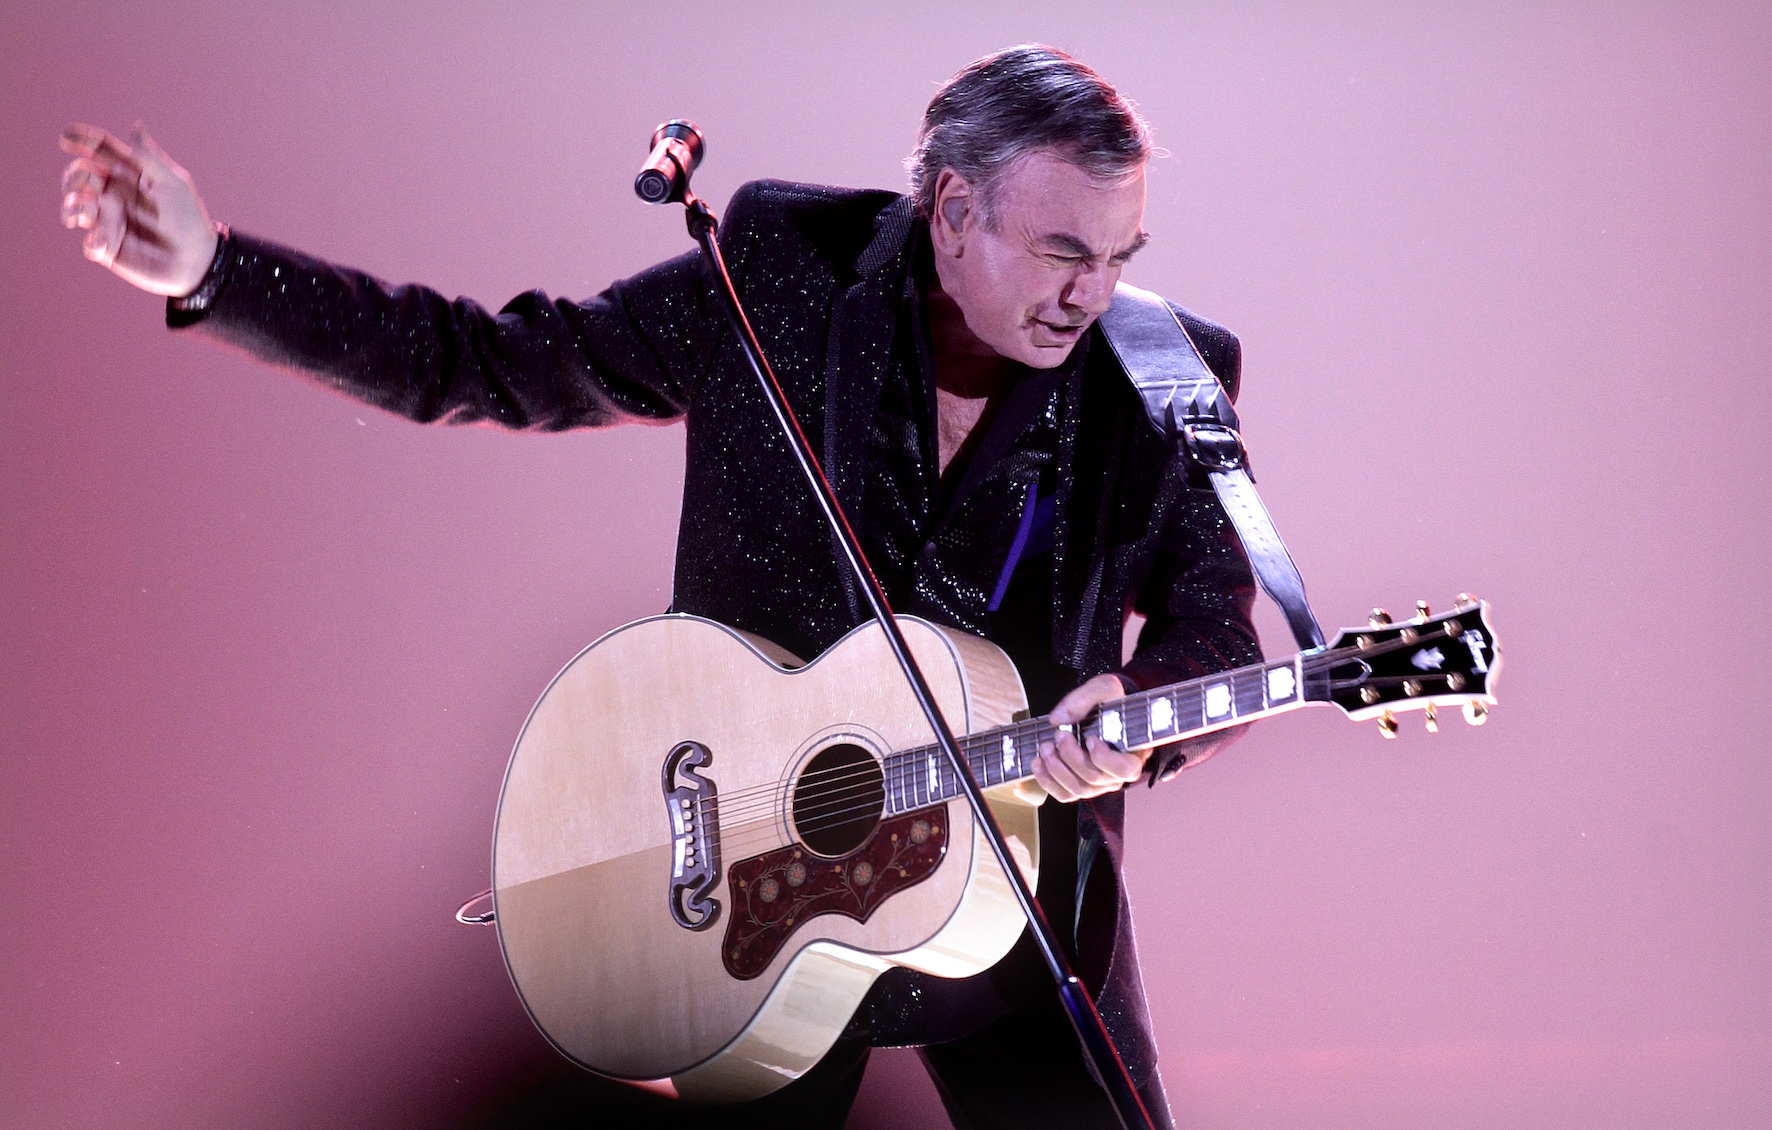 Neil Diamond playing his guitar against a pink background